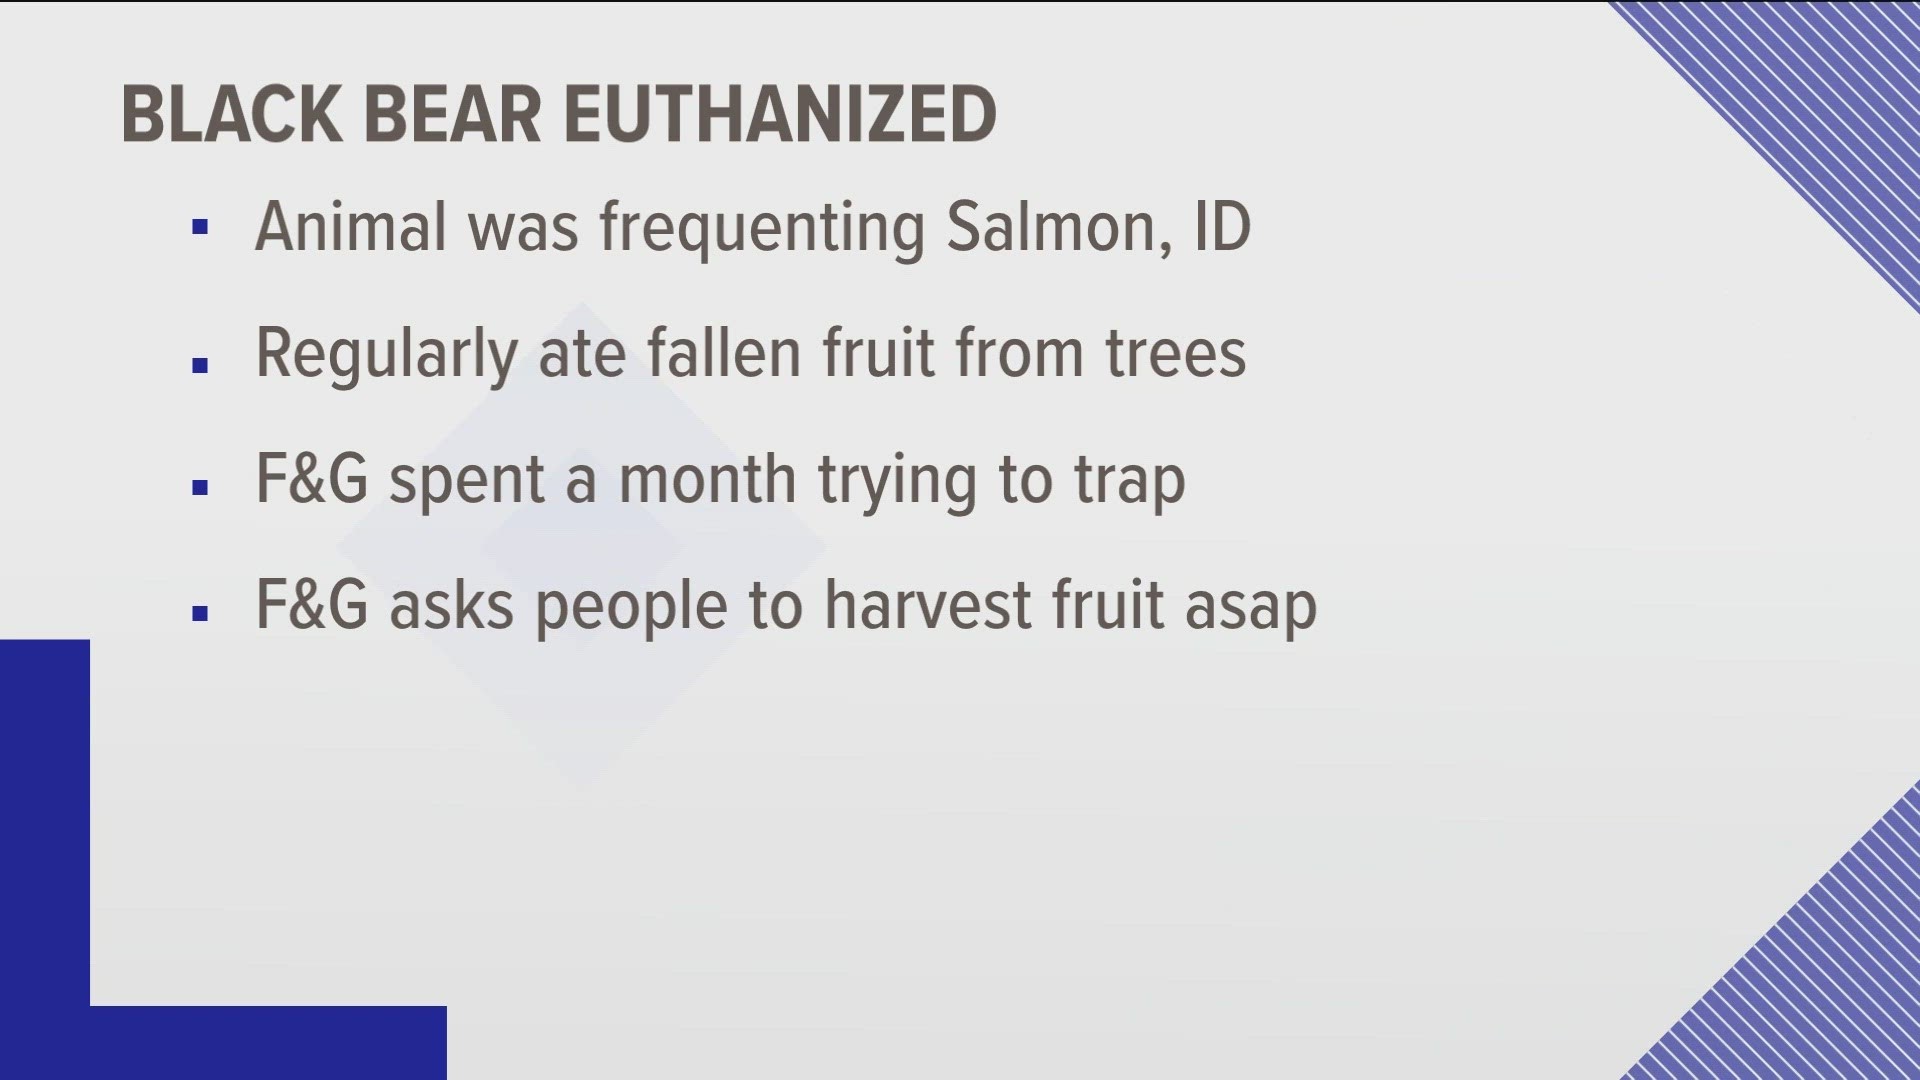 The department said it tried trapping the bear for weeks before deciding to kill it over the weekend.